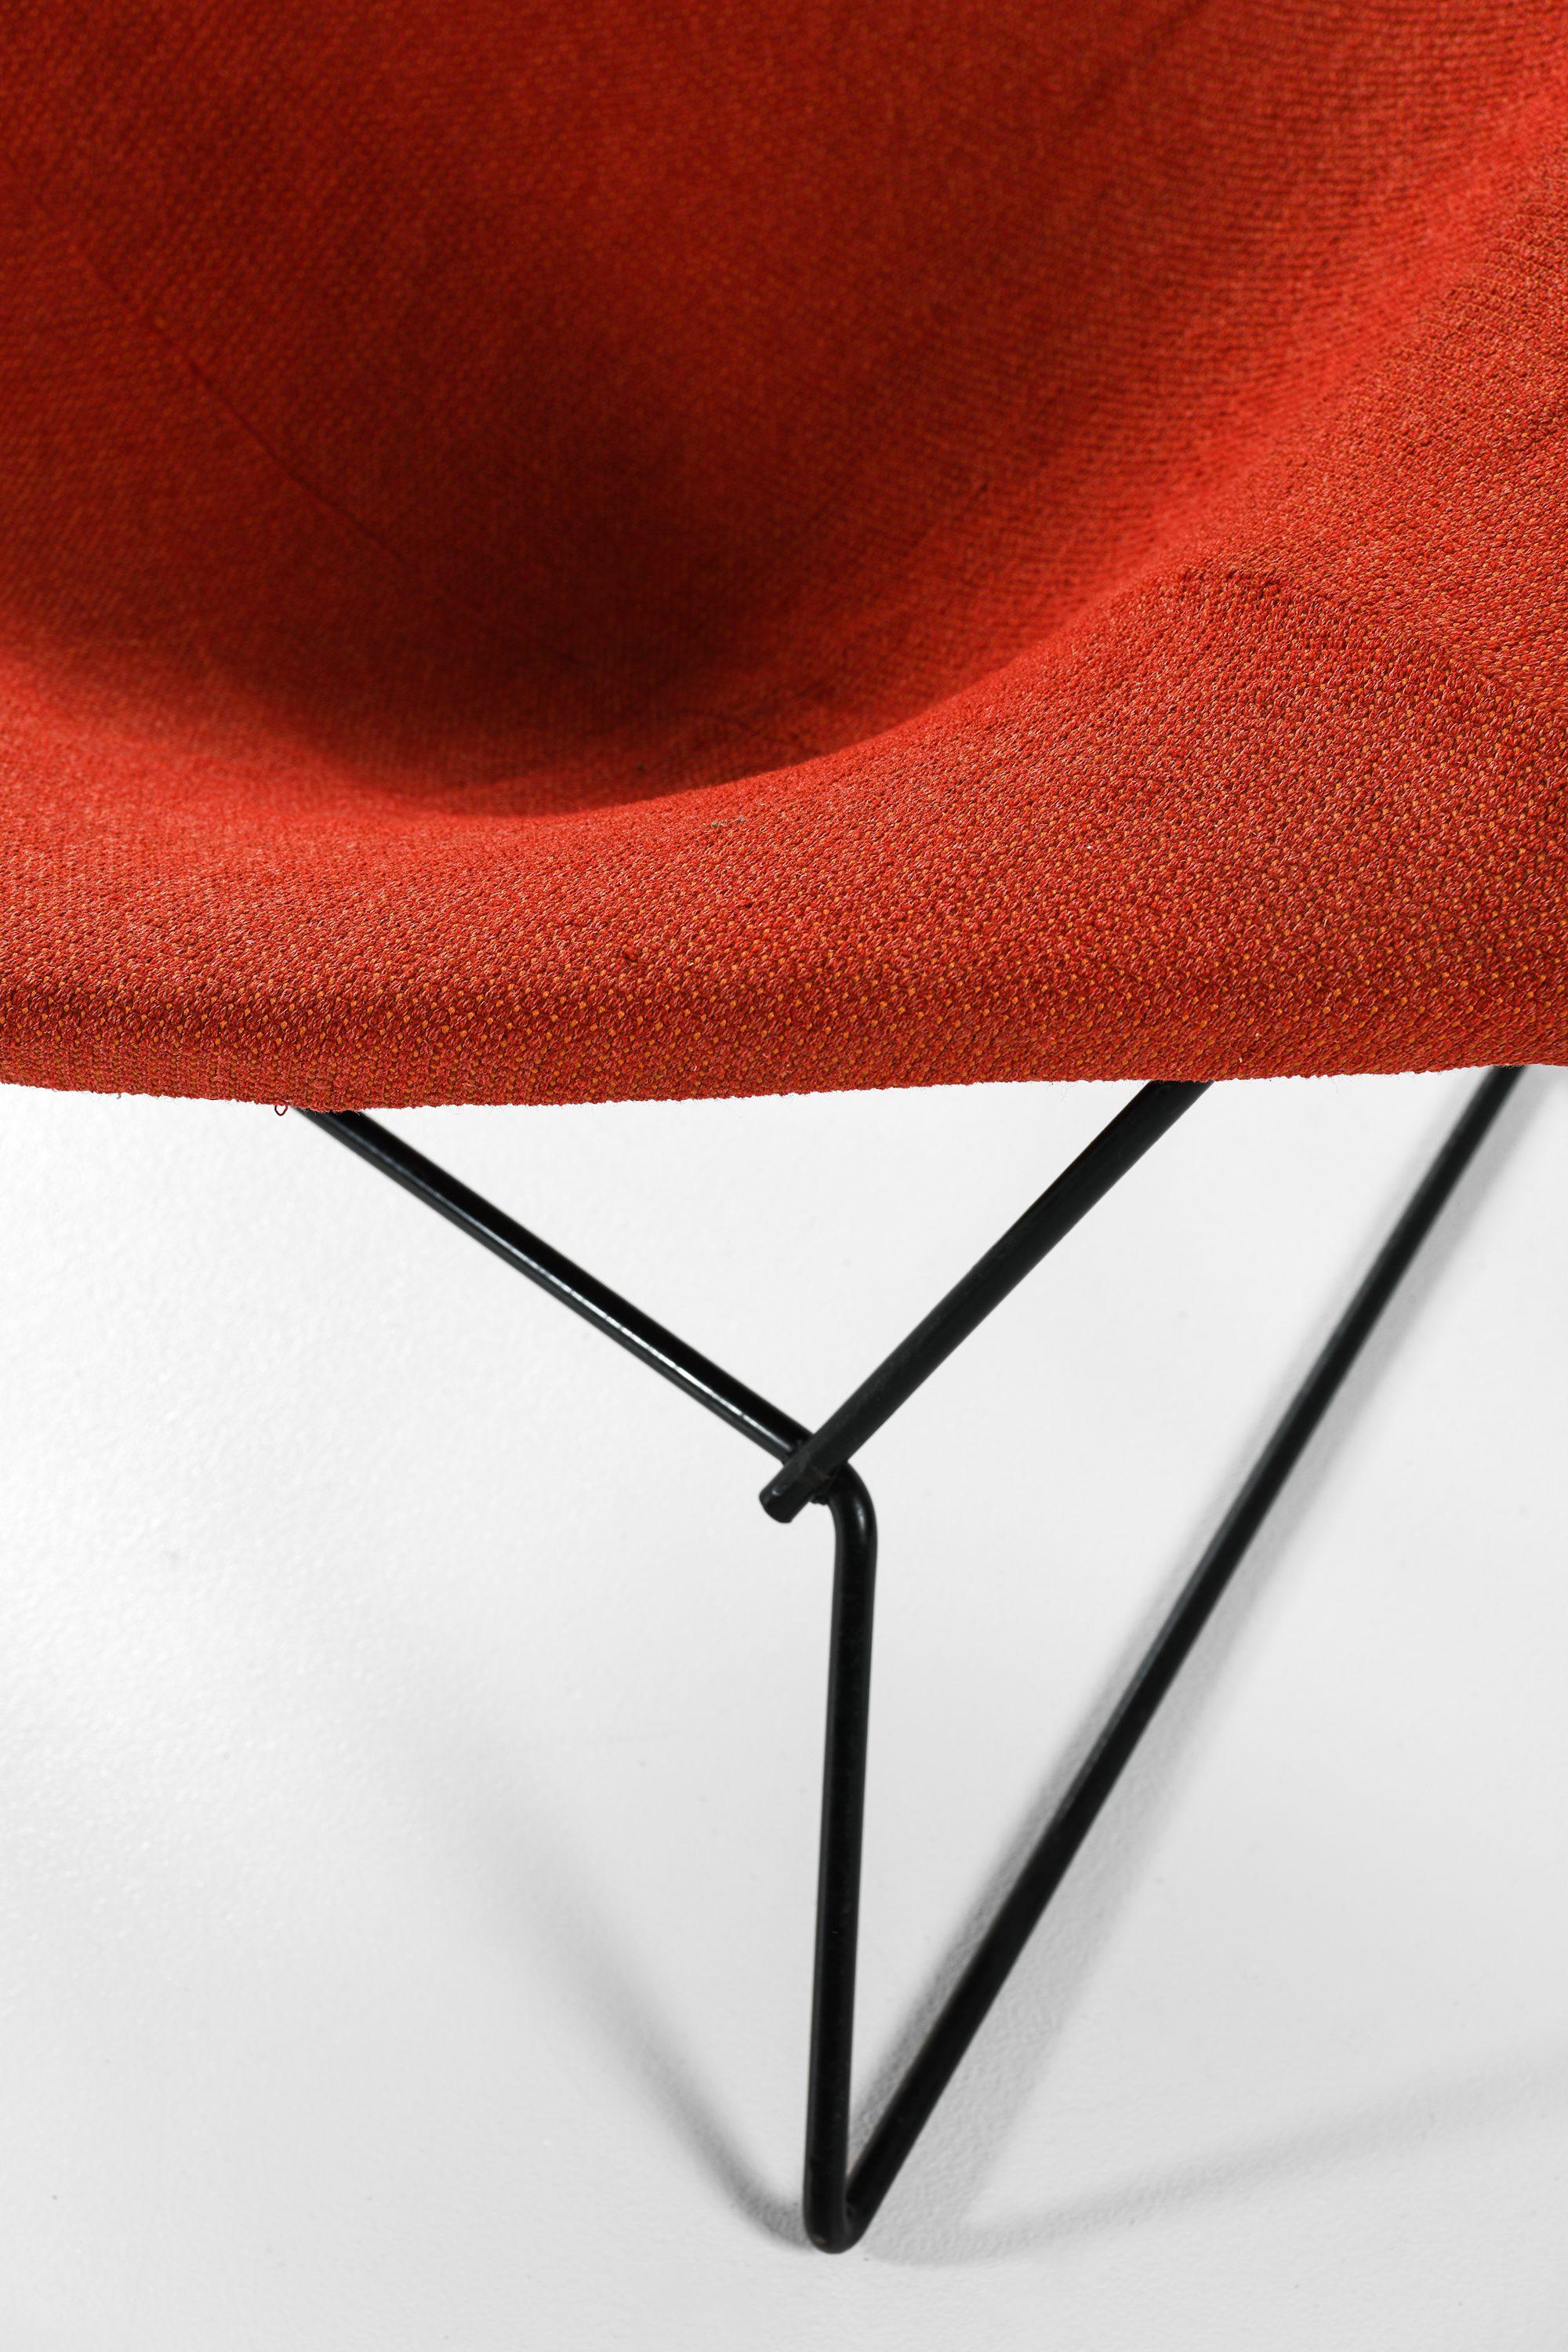 Easy Bird Chair in Black Lacquered Metal and Red Fabric by Harry Bertoia, 1950s For Sale 4